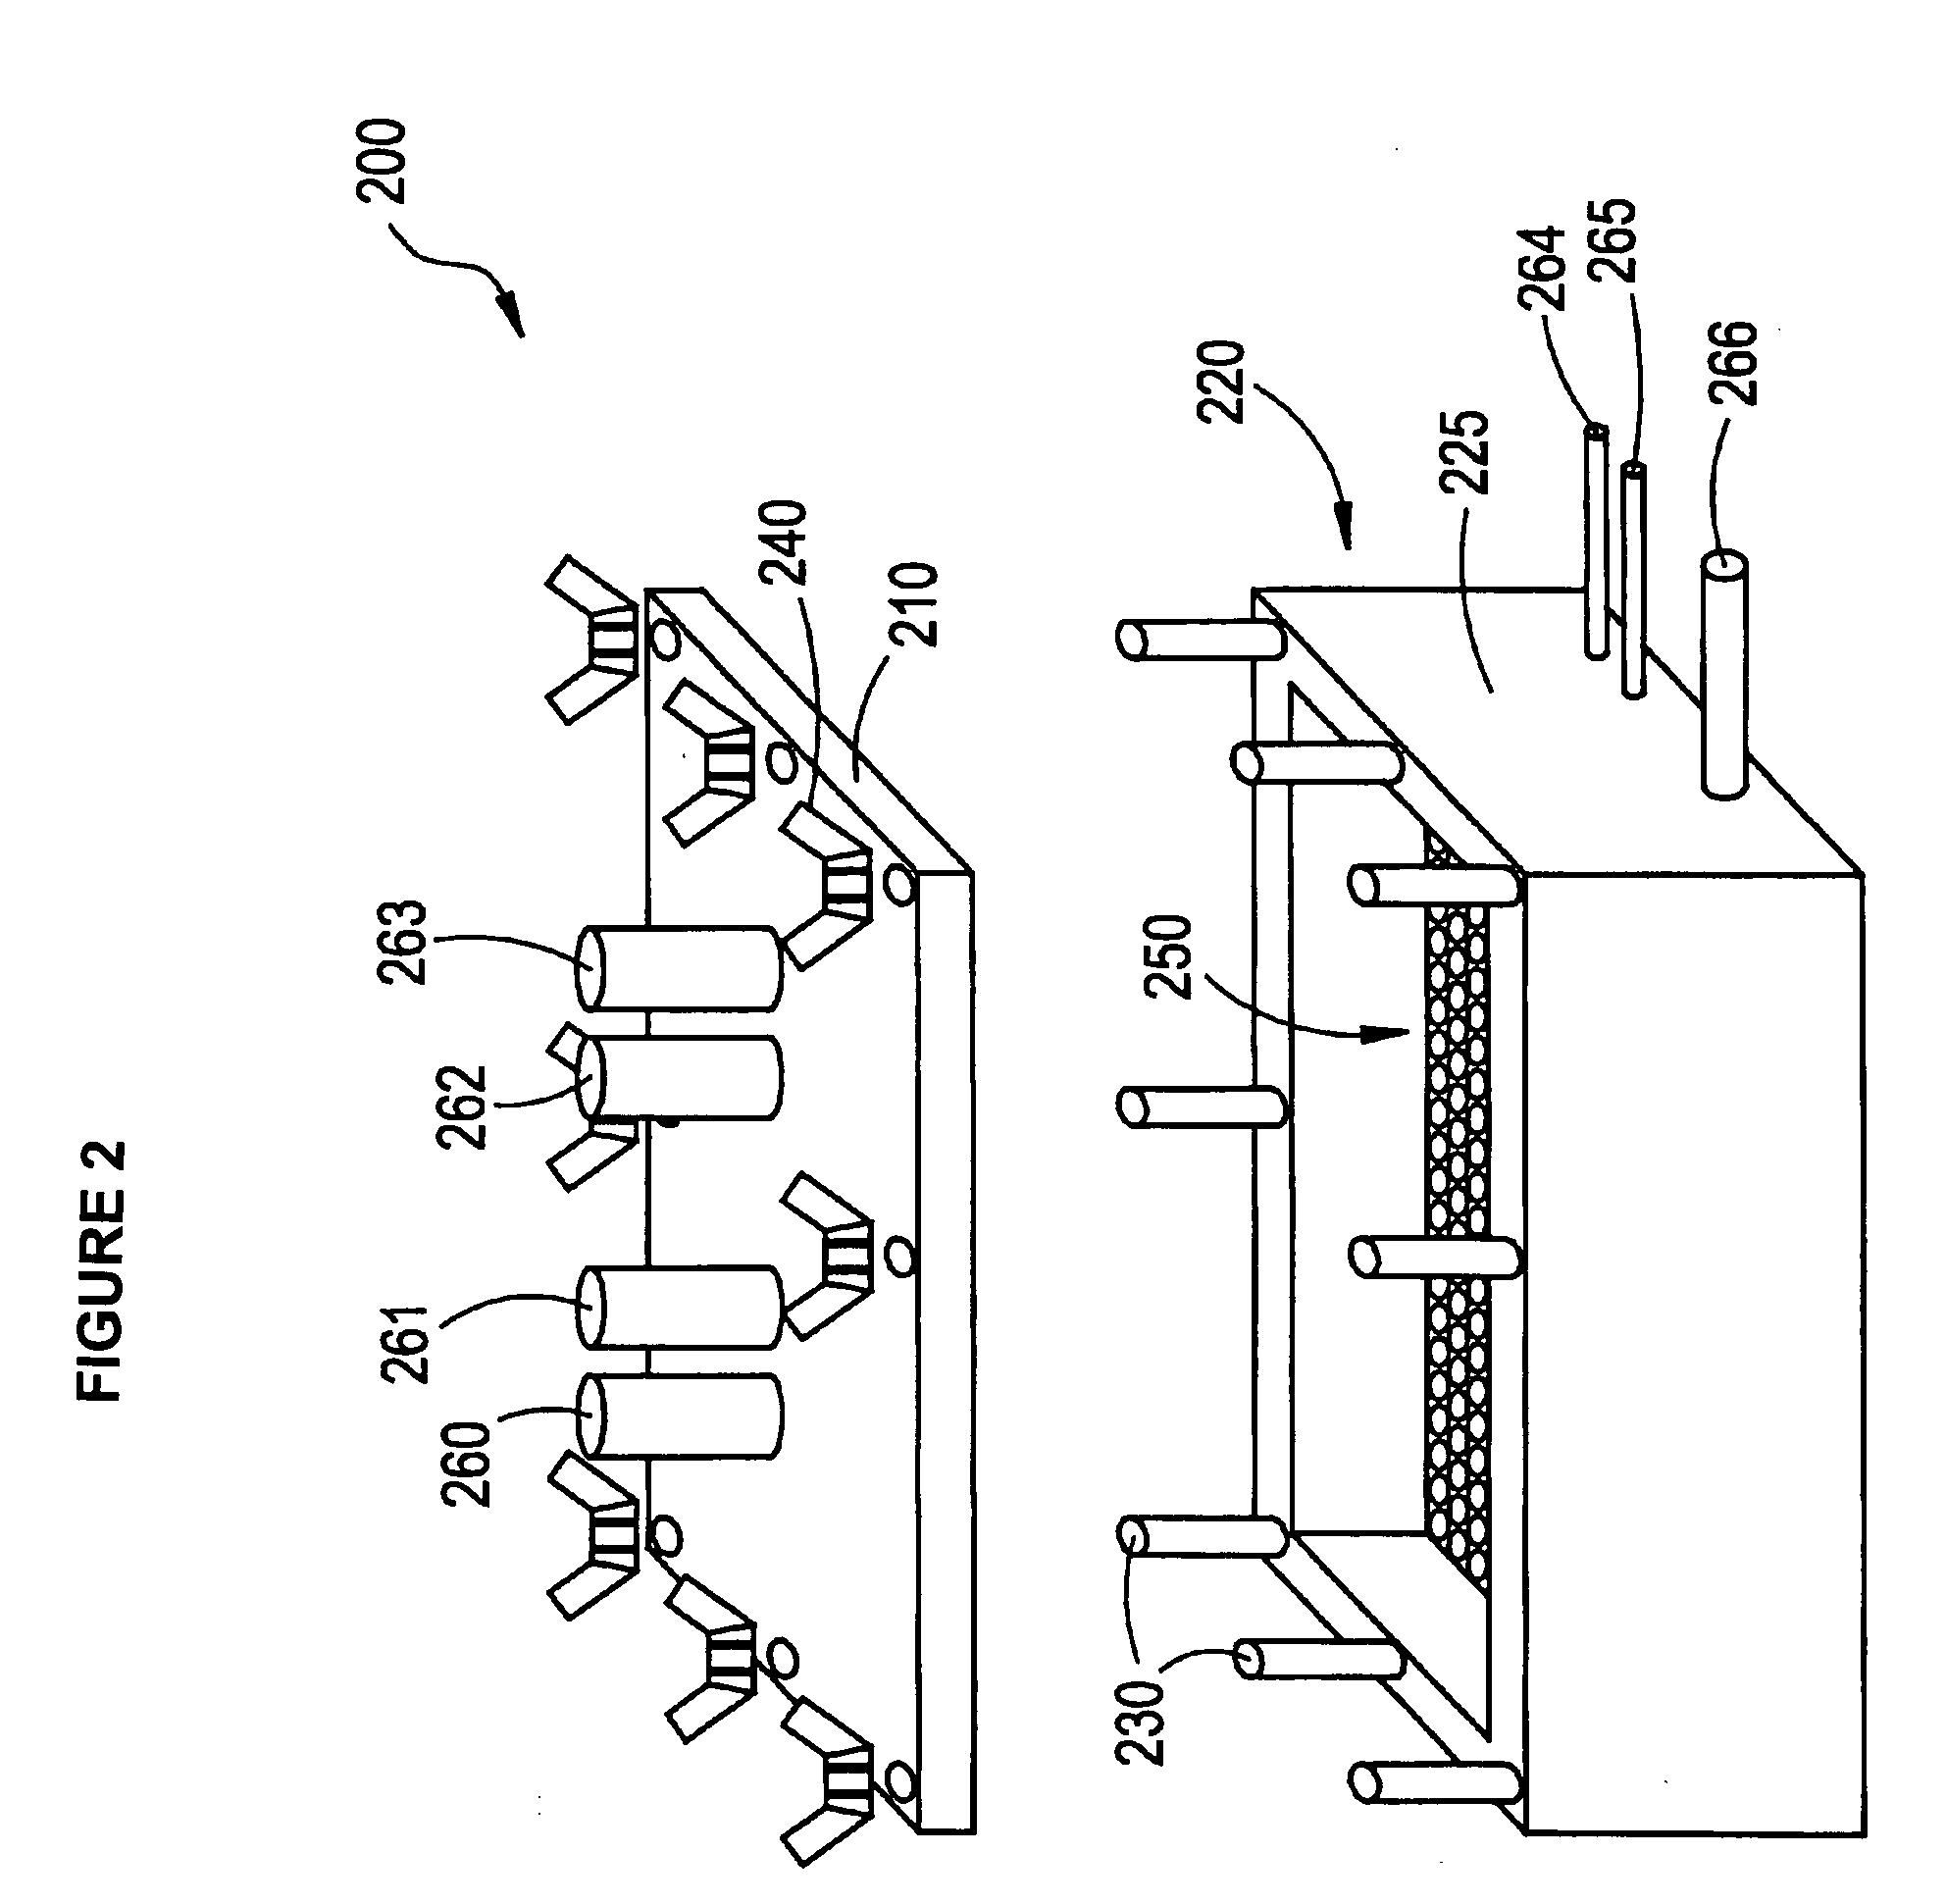 Process and apparatus for treating implants comprising soft tissue